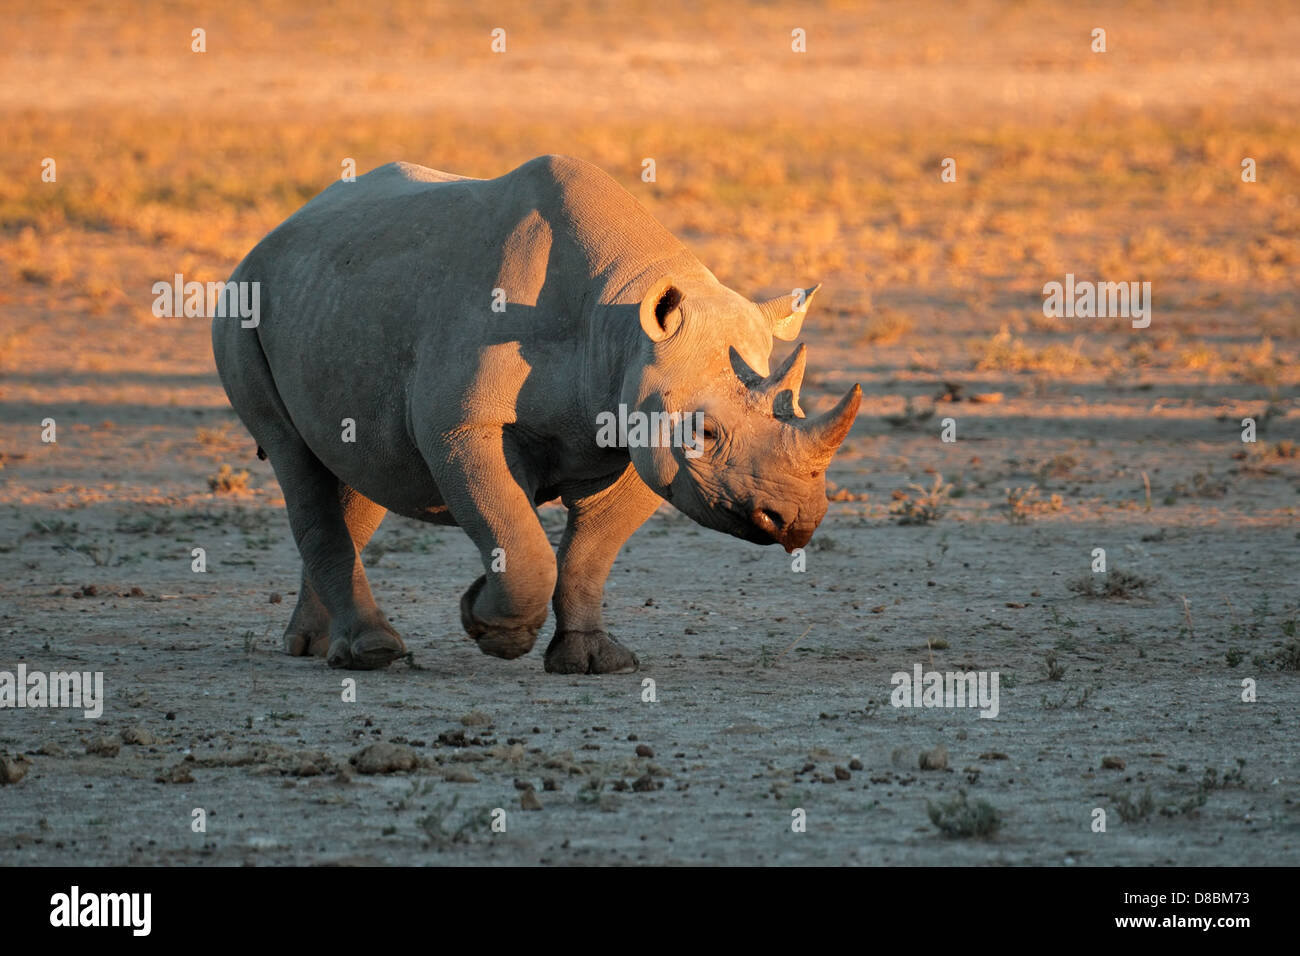 A black (hooked-lipped) rhinoceros (Diceros bicornis) in late afternoon light, South Africa Stock Photo